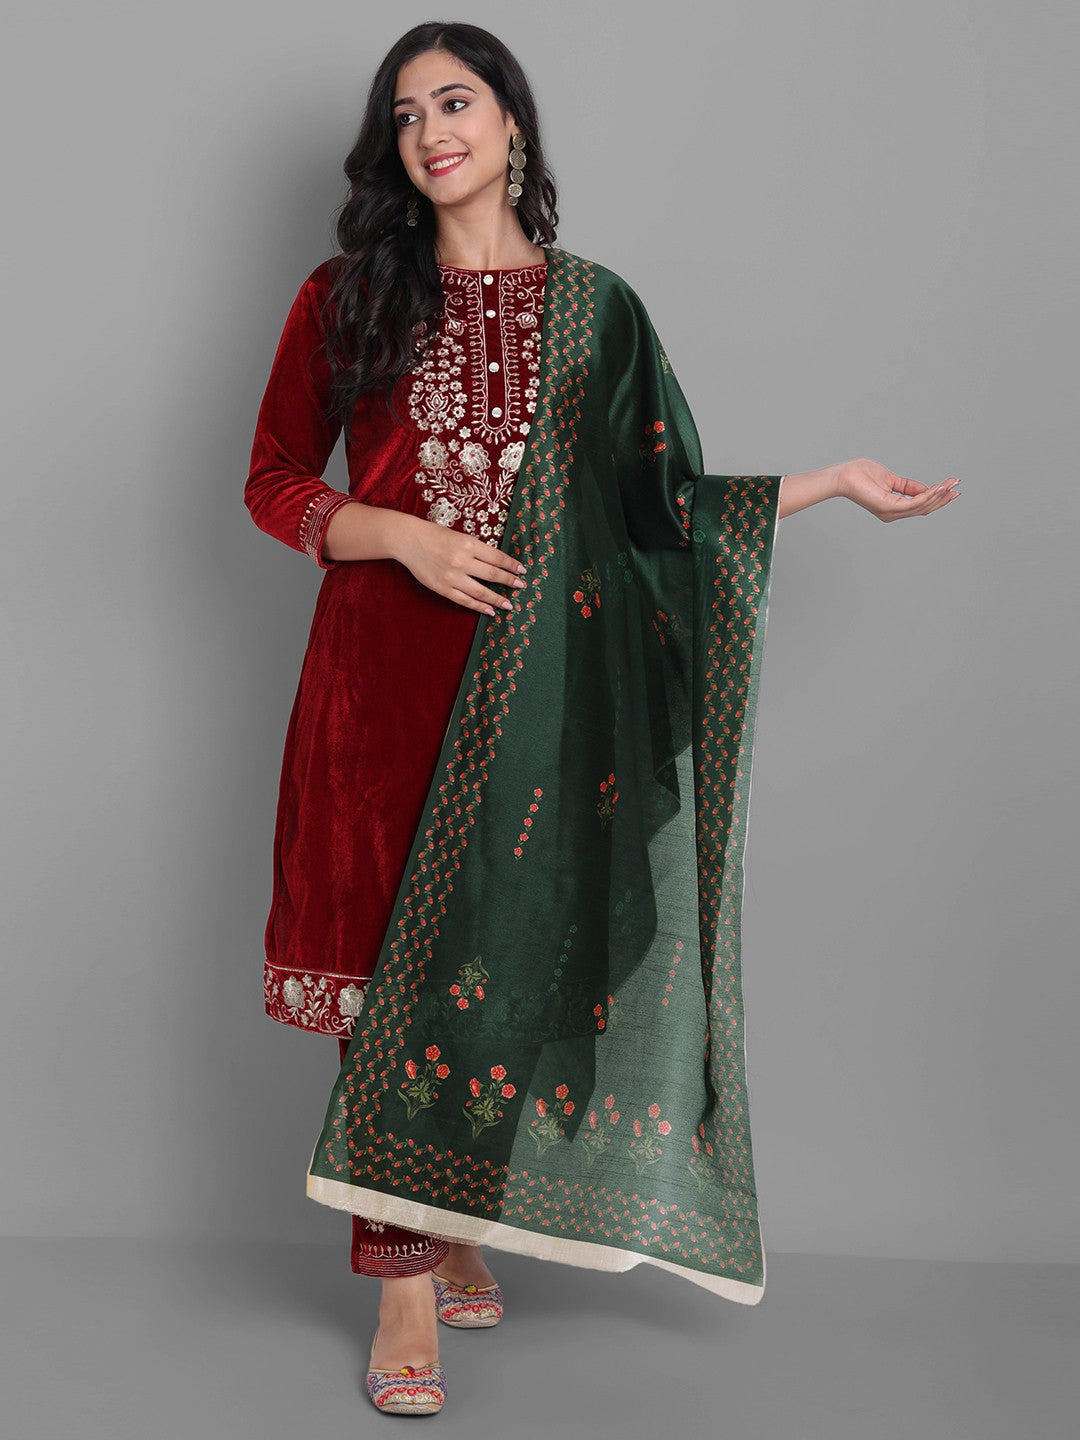 Women's Red Embroidered Velvet Kurta With Trousers & Withã¢ Dupatta - Noz2Toz